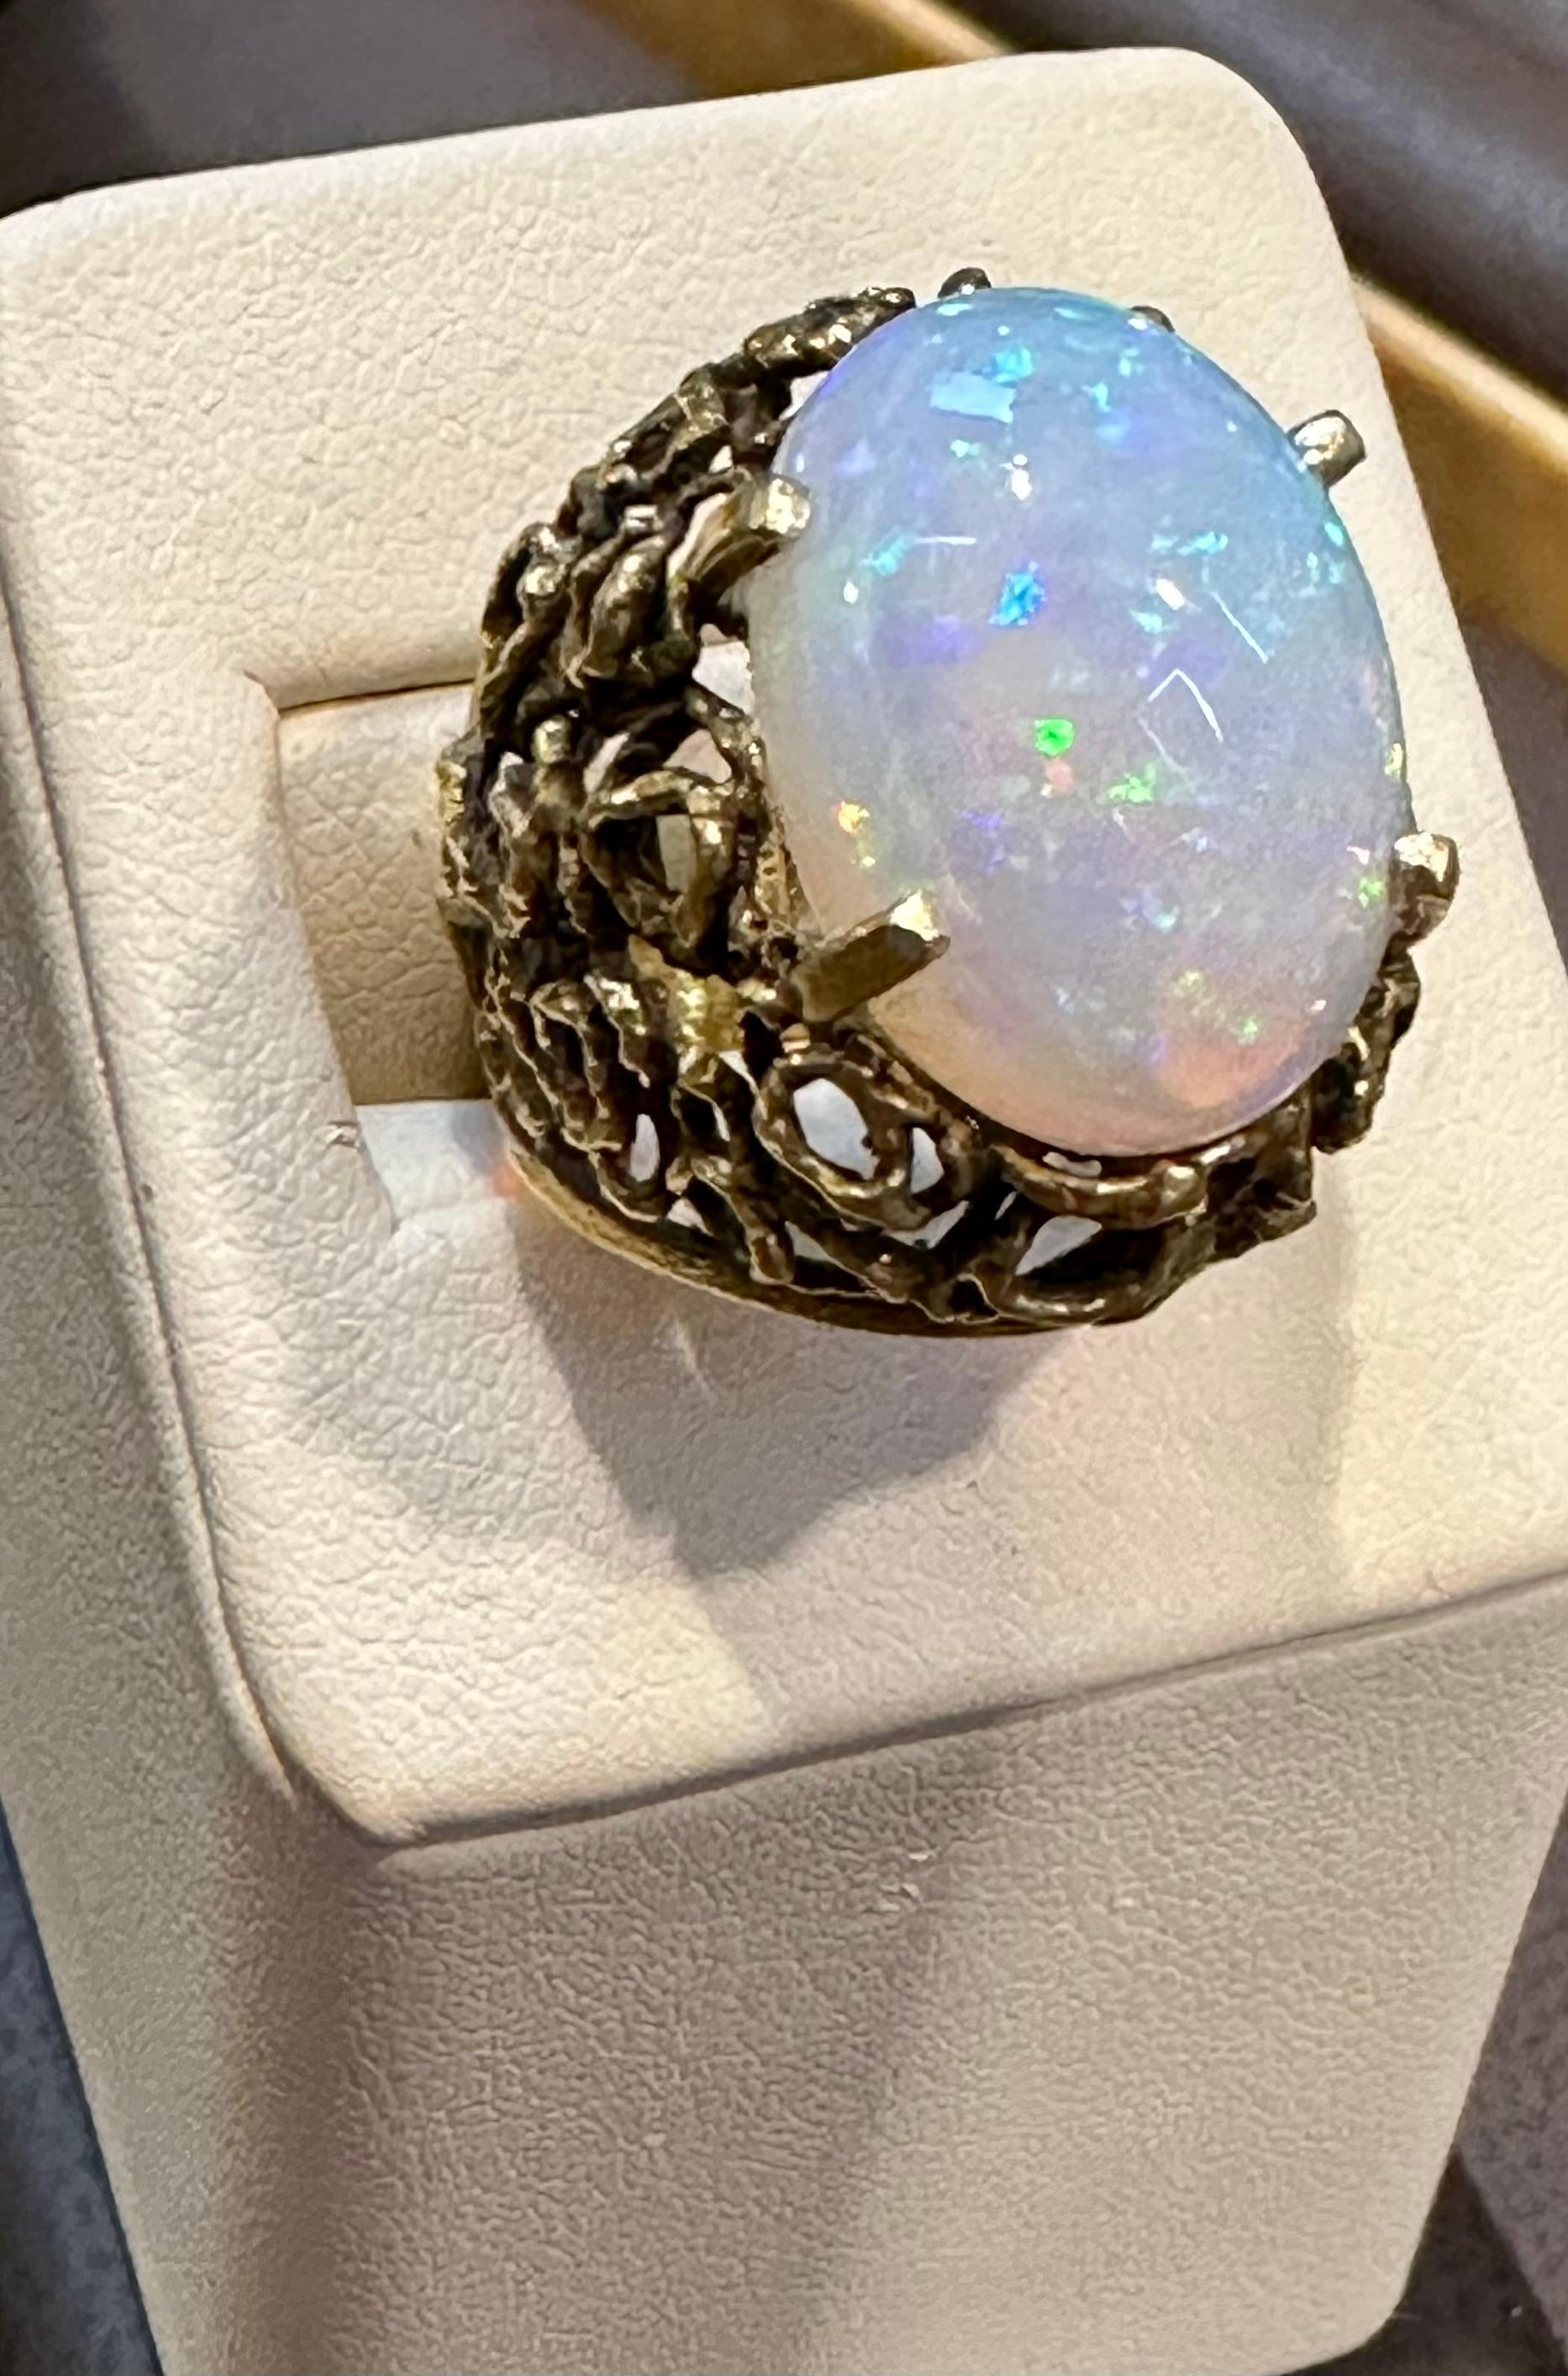 A Huge Cocktail ring 
Approximately 11 Carat Oval Ethiopian Opal  & Diamond Ring 14 Karat Yellow Gold Size 6
This spectacular Ring consisting of a single Oval Shape Ethiopian Opal Approximately 11 Carat. 

very clean Stone no inclusion , full of